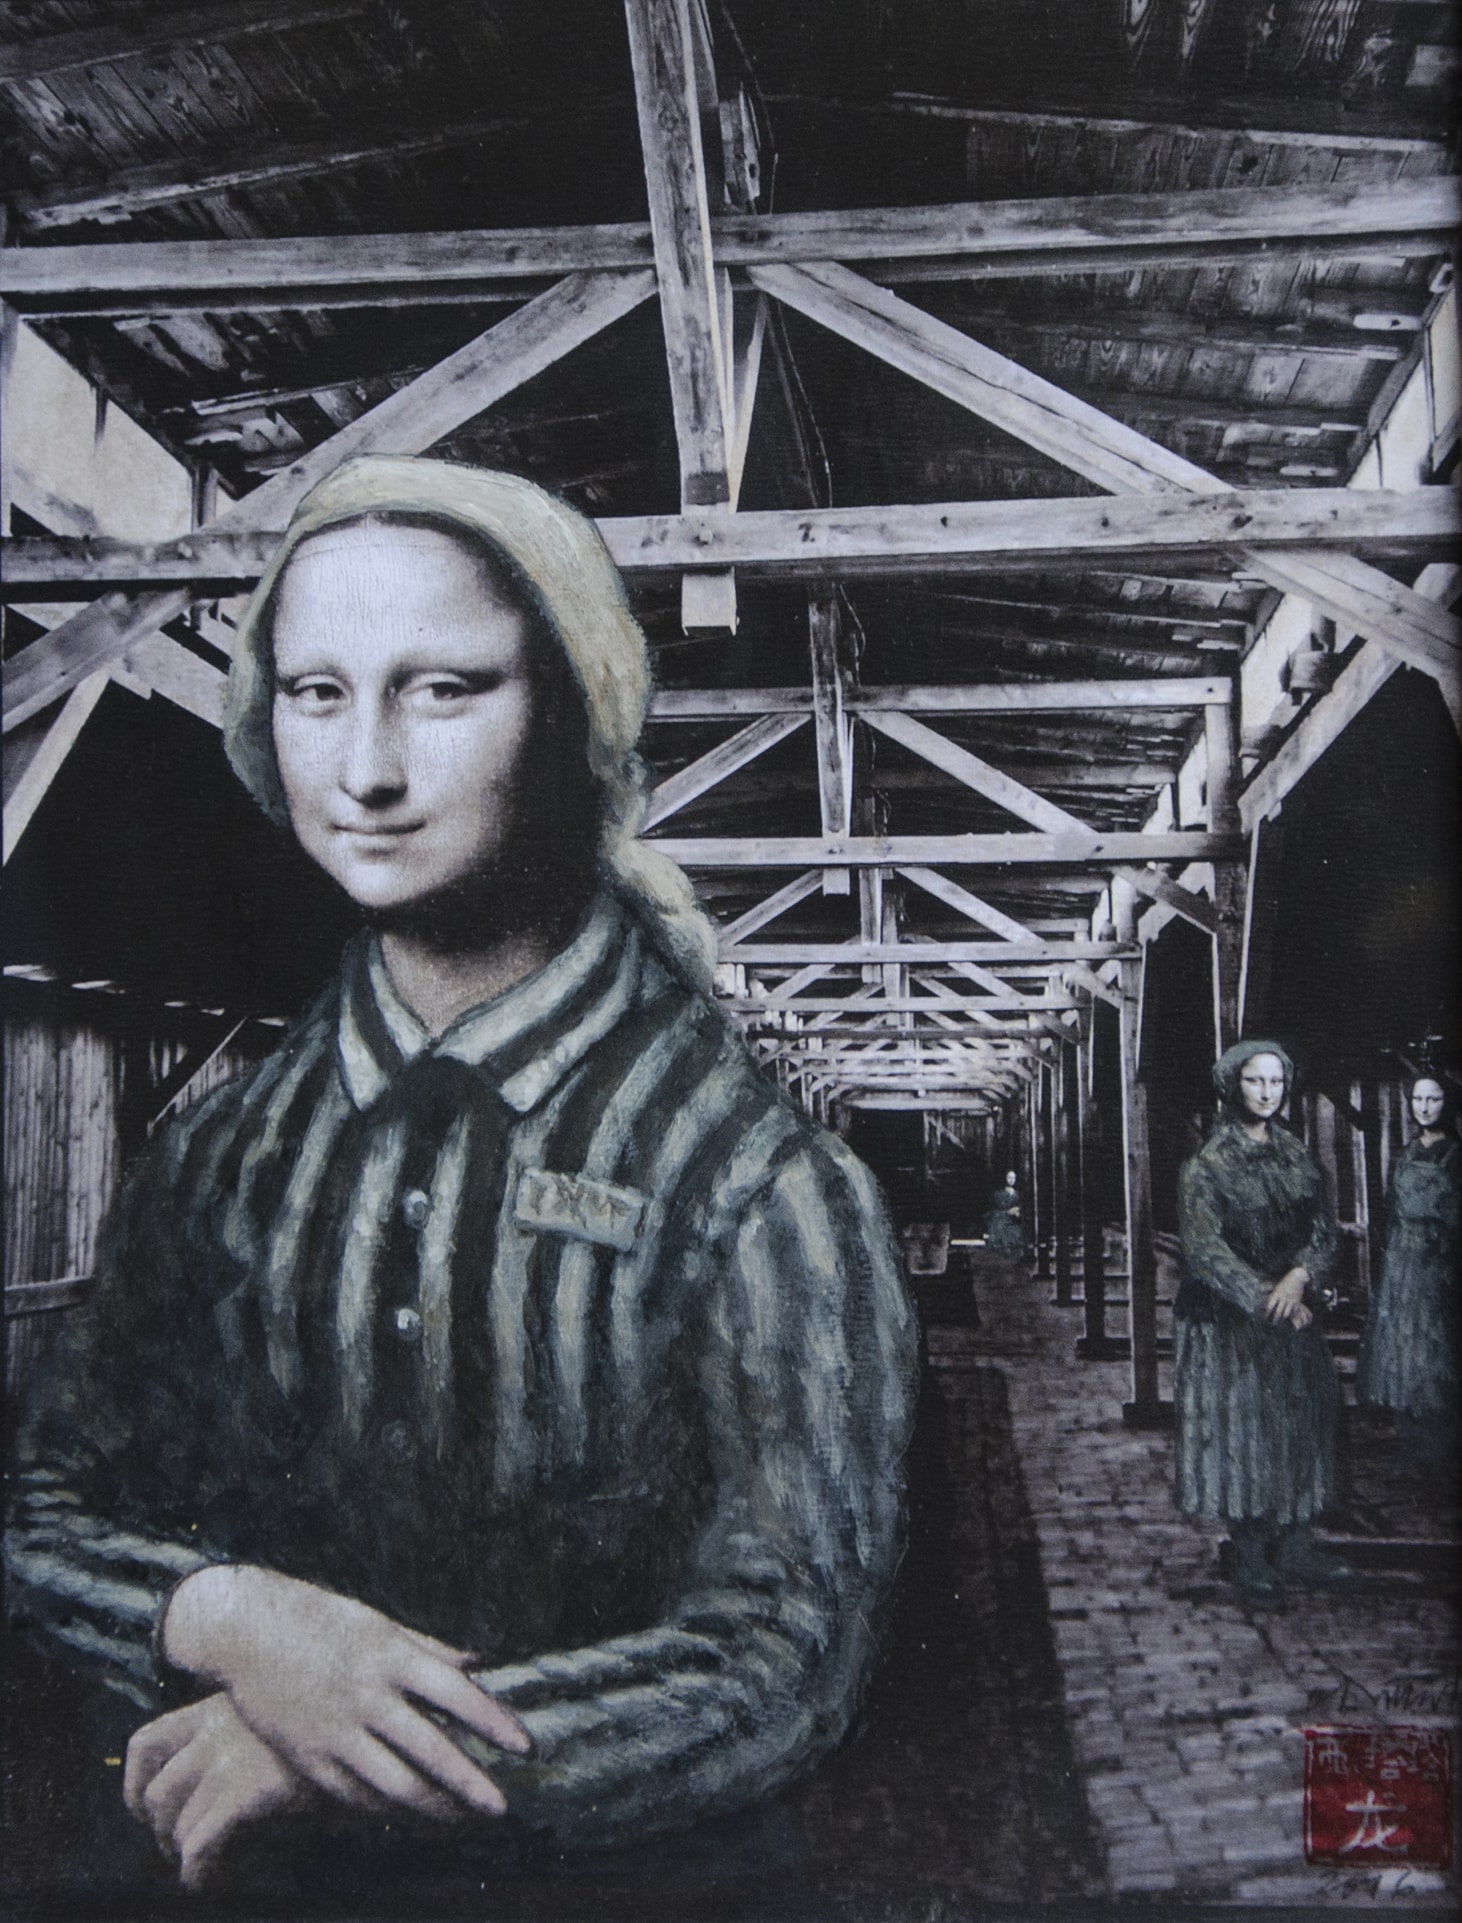 CHHATRAPATI DUTTA, MONALISA IN AUSCHWITZ, QUOTED IMAGES, CG PRINT ON ARCHIVAL PAPER, WATER COLOUR 12X9 IN